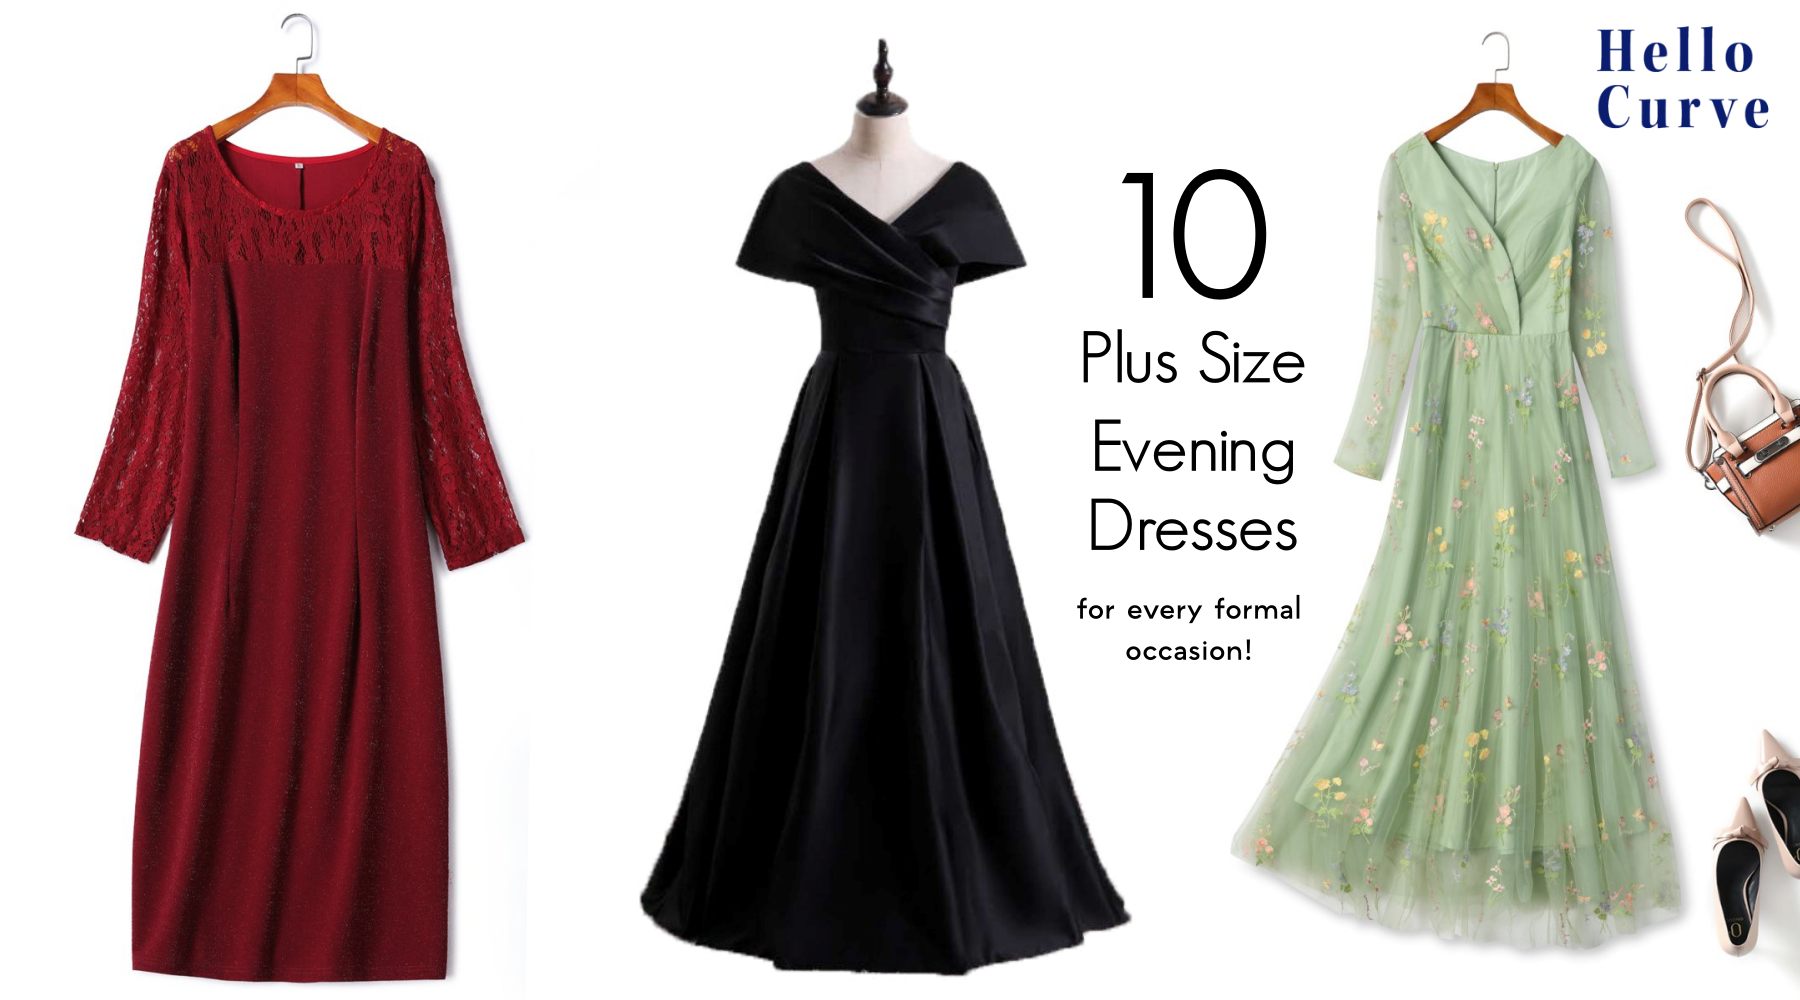 10 Plus Size Evening Dresses for Every Formal Occasion